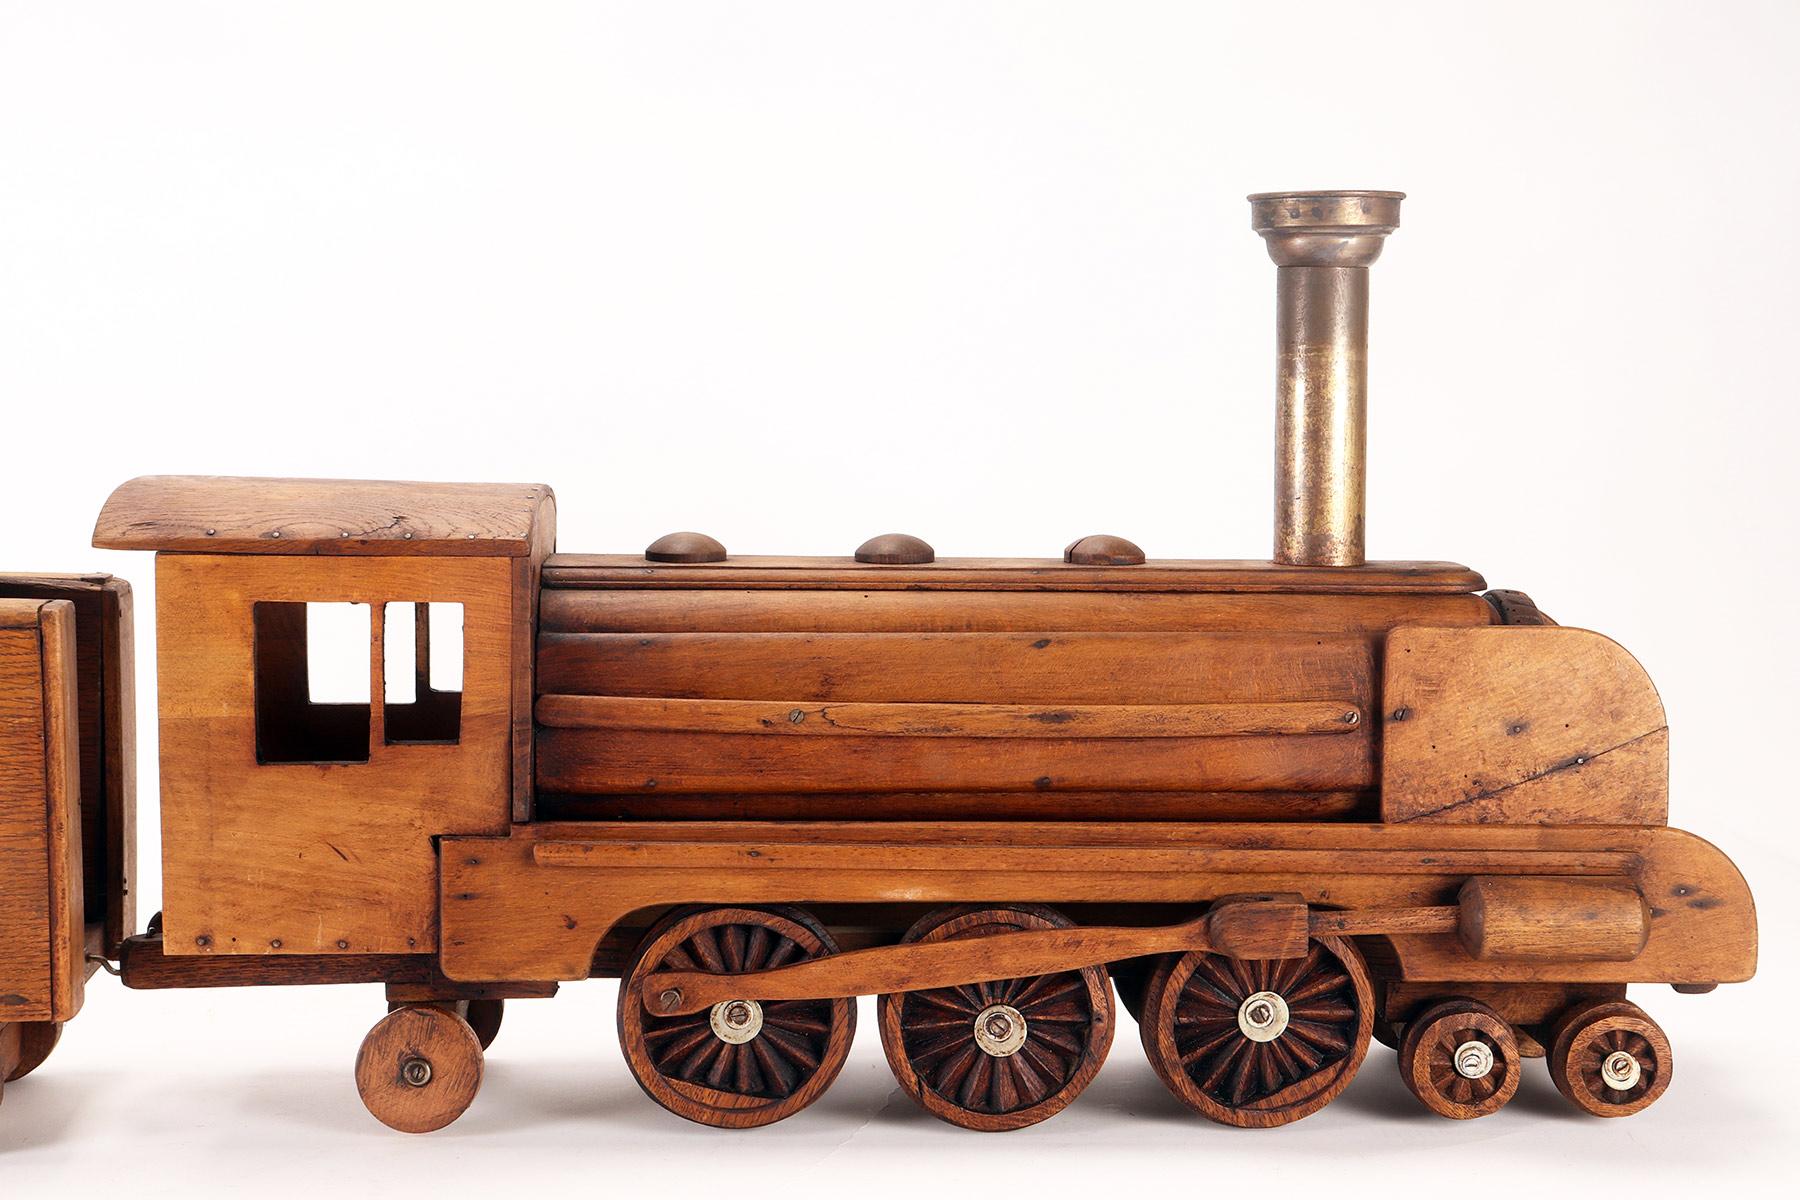 Metal Folk Art Model of a Toy Depicting a Steam Train, USA, 1900 For Sale